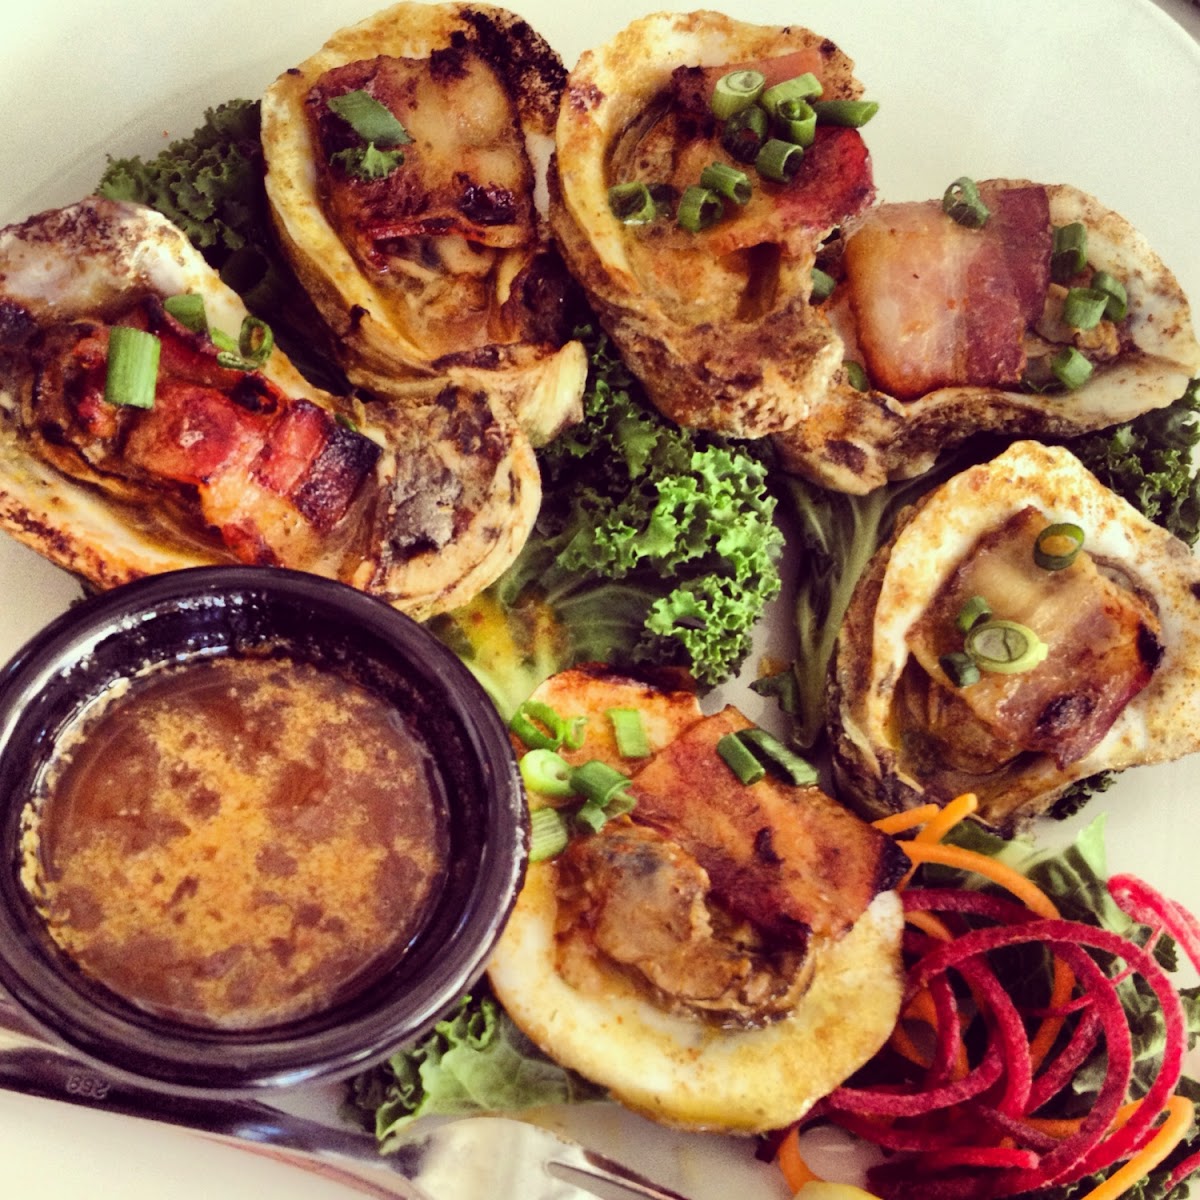 Bacon oysters